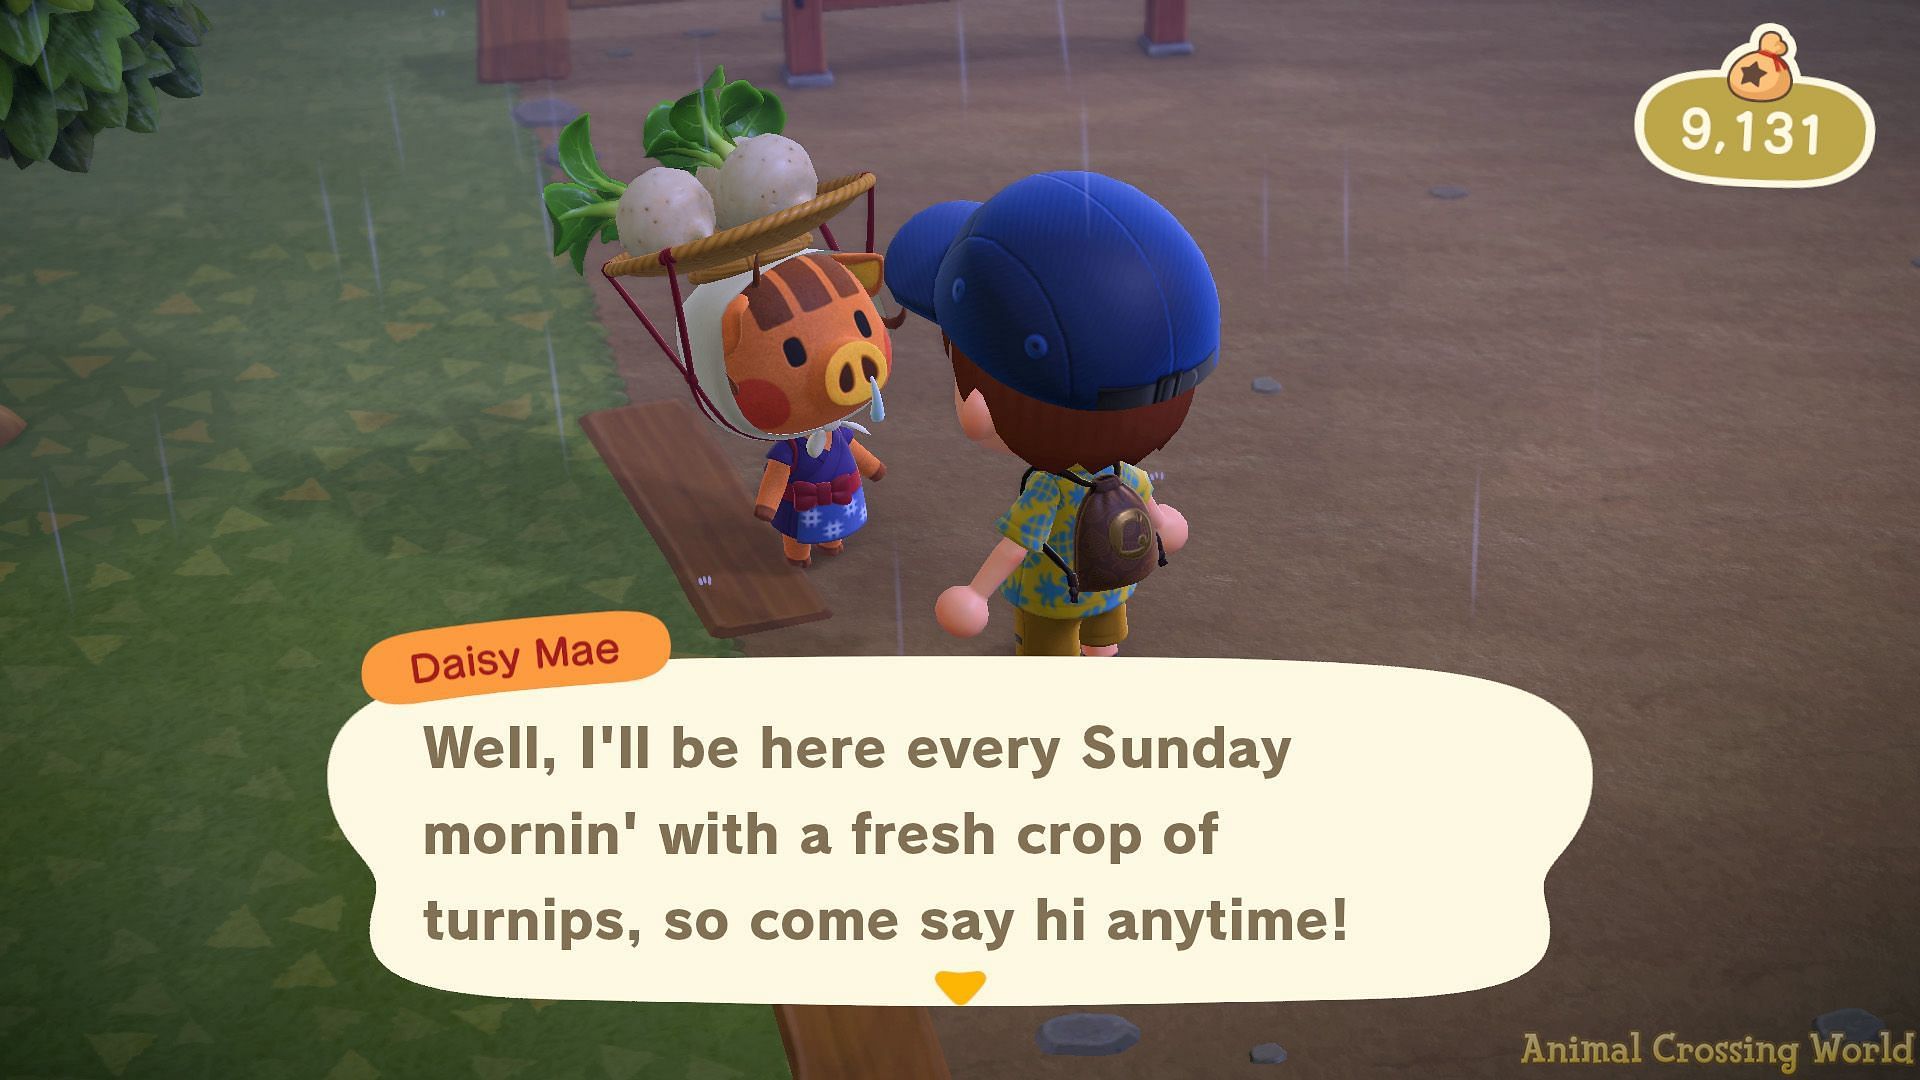 Turnip trade is a very important thing in Animal Crossing: New Horizons (Image via Animal Crossing World)